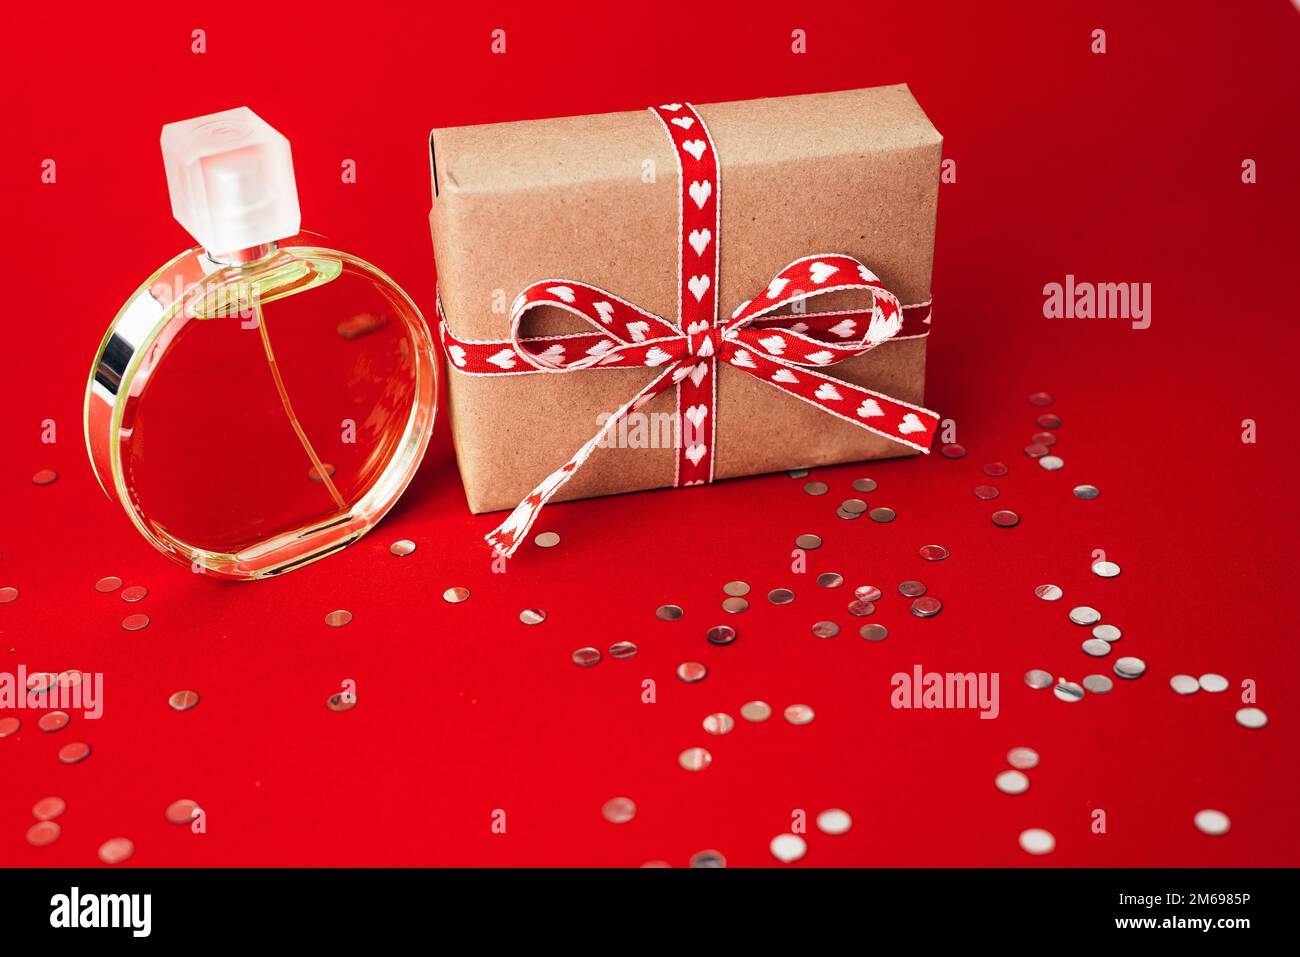 Perfume and gift box on red background. Gift on valentine's day Stock Photo